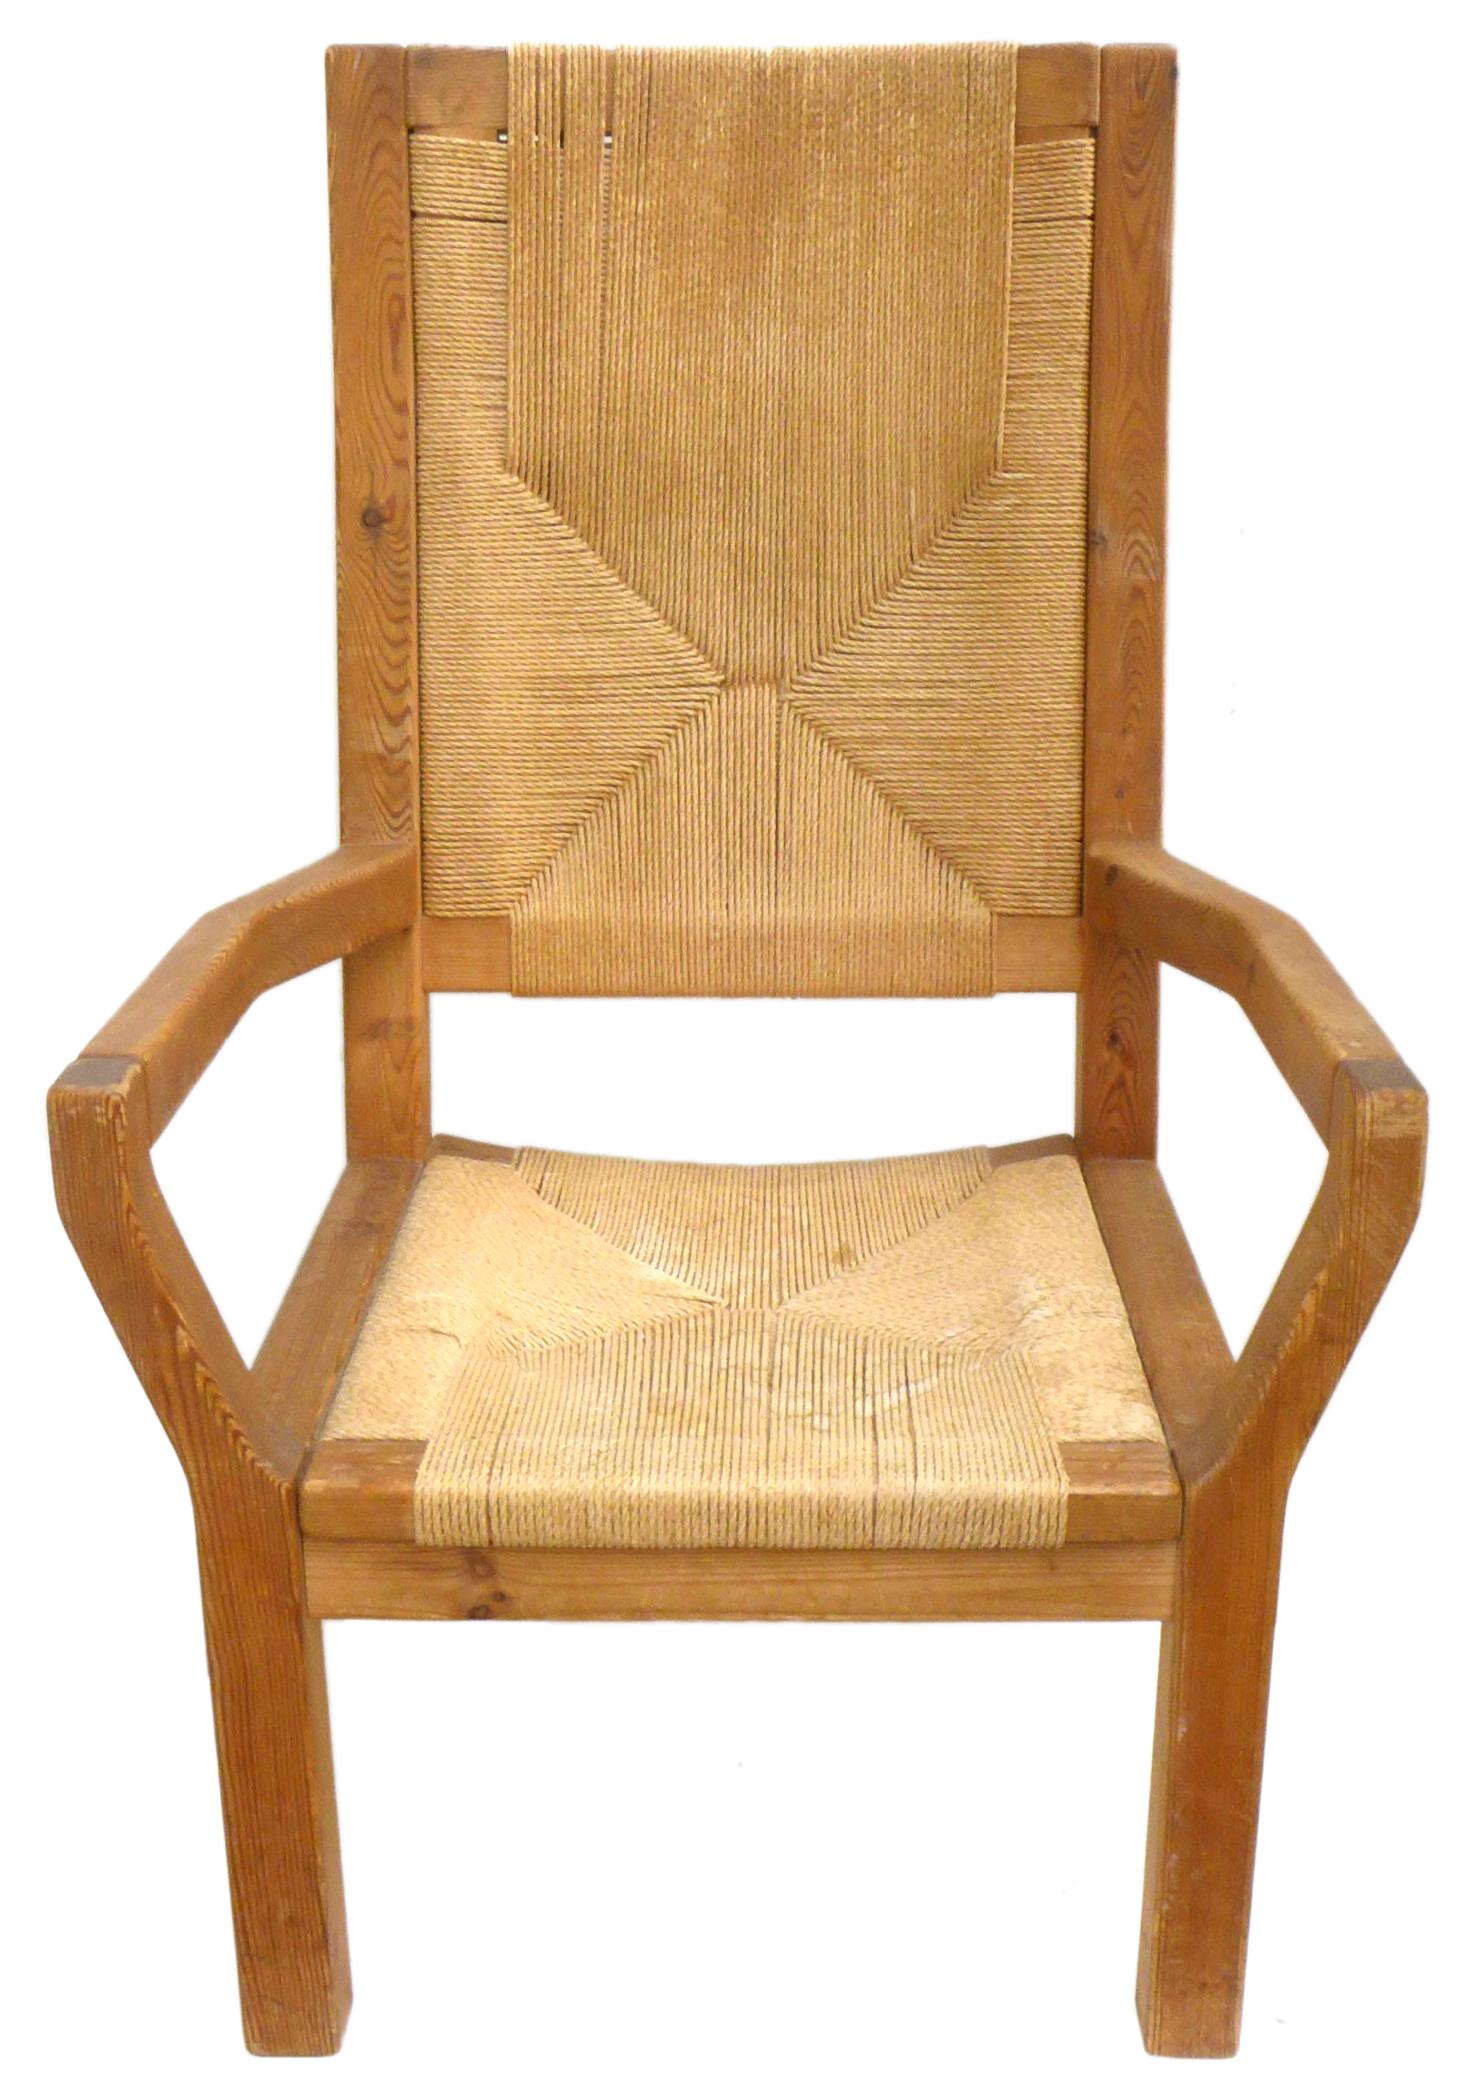 A fantastic pair of Dutch, wood and woven-twine highback armchairs. Handsome, well-built forms with unexpected angles, wonderful woodgrain, and an ample, comfortable seating area. Great, impressive scale and proportions; a classic mix of materials